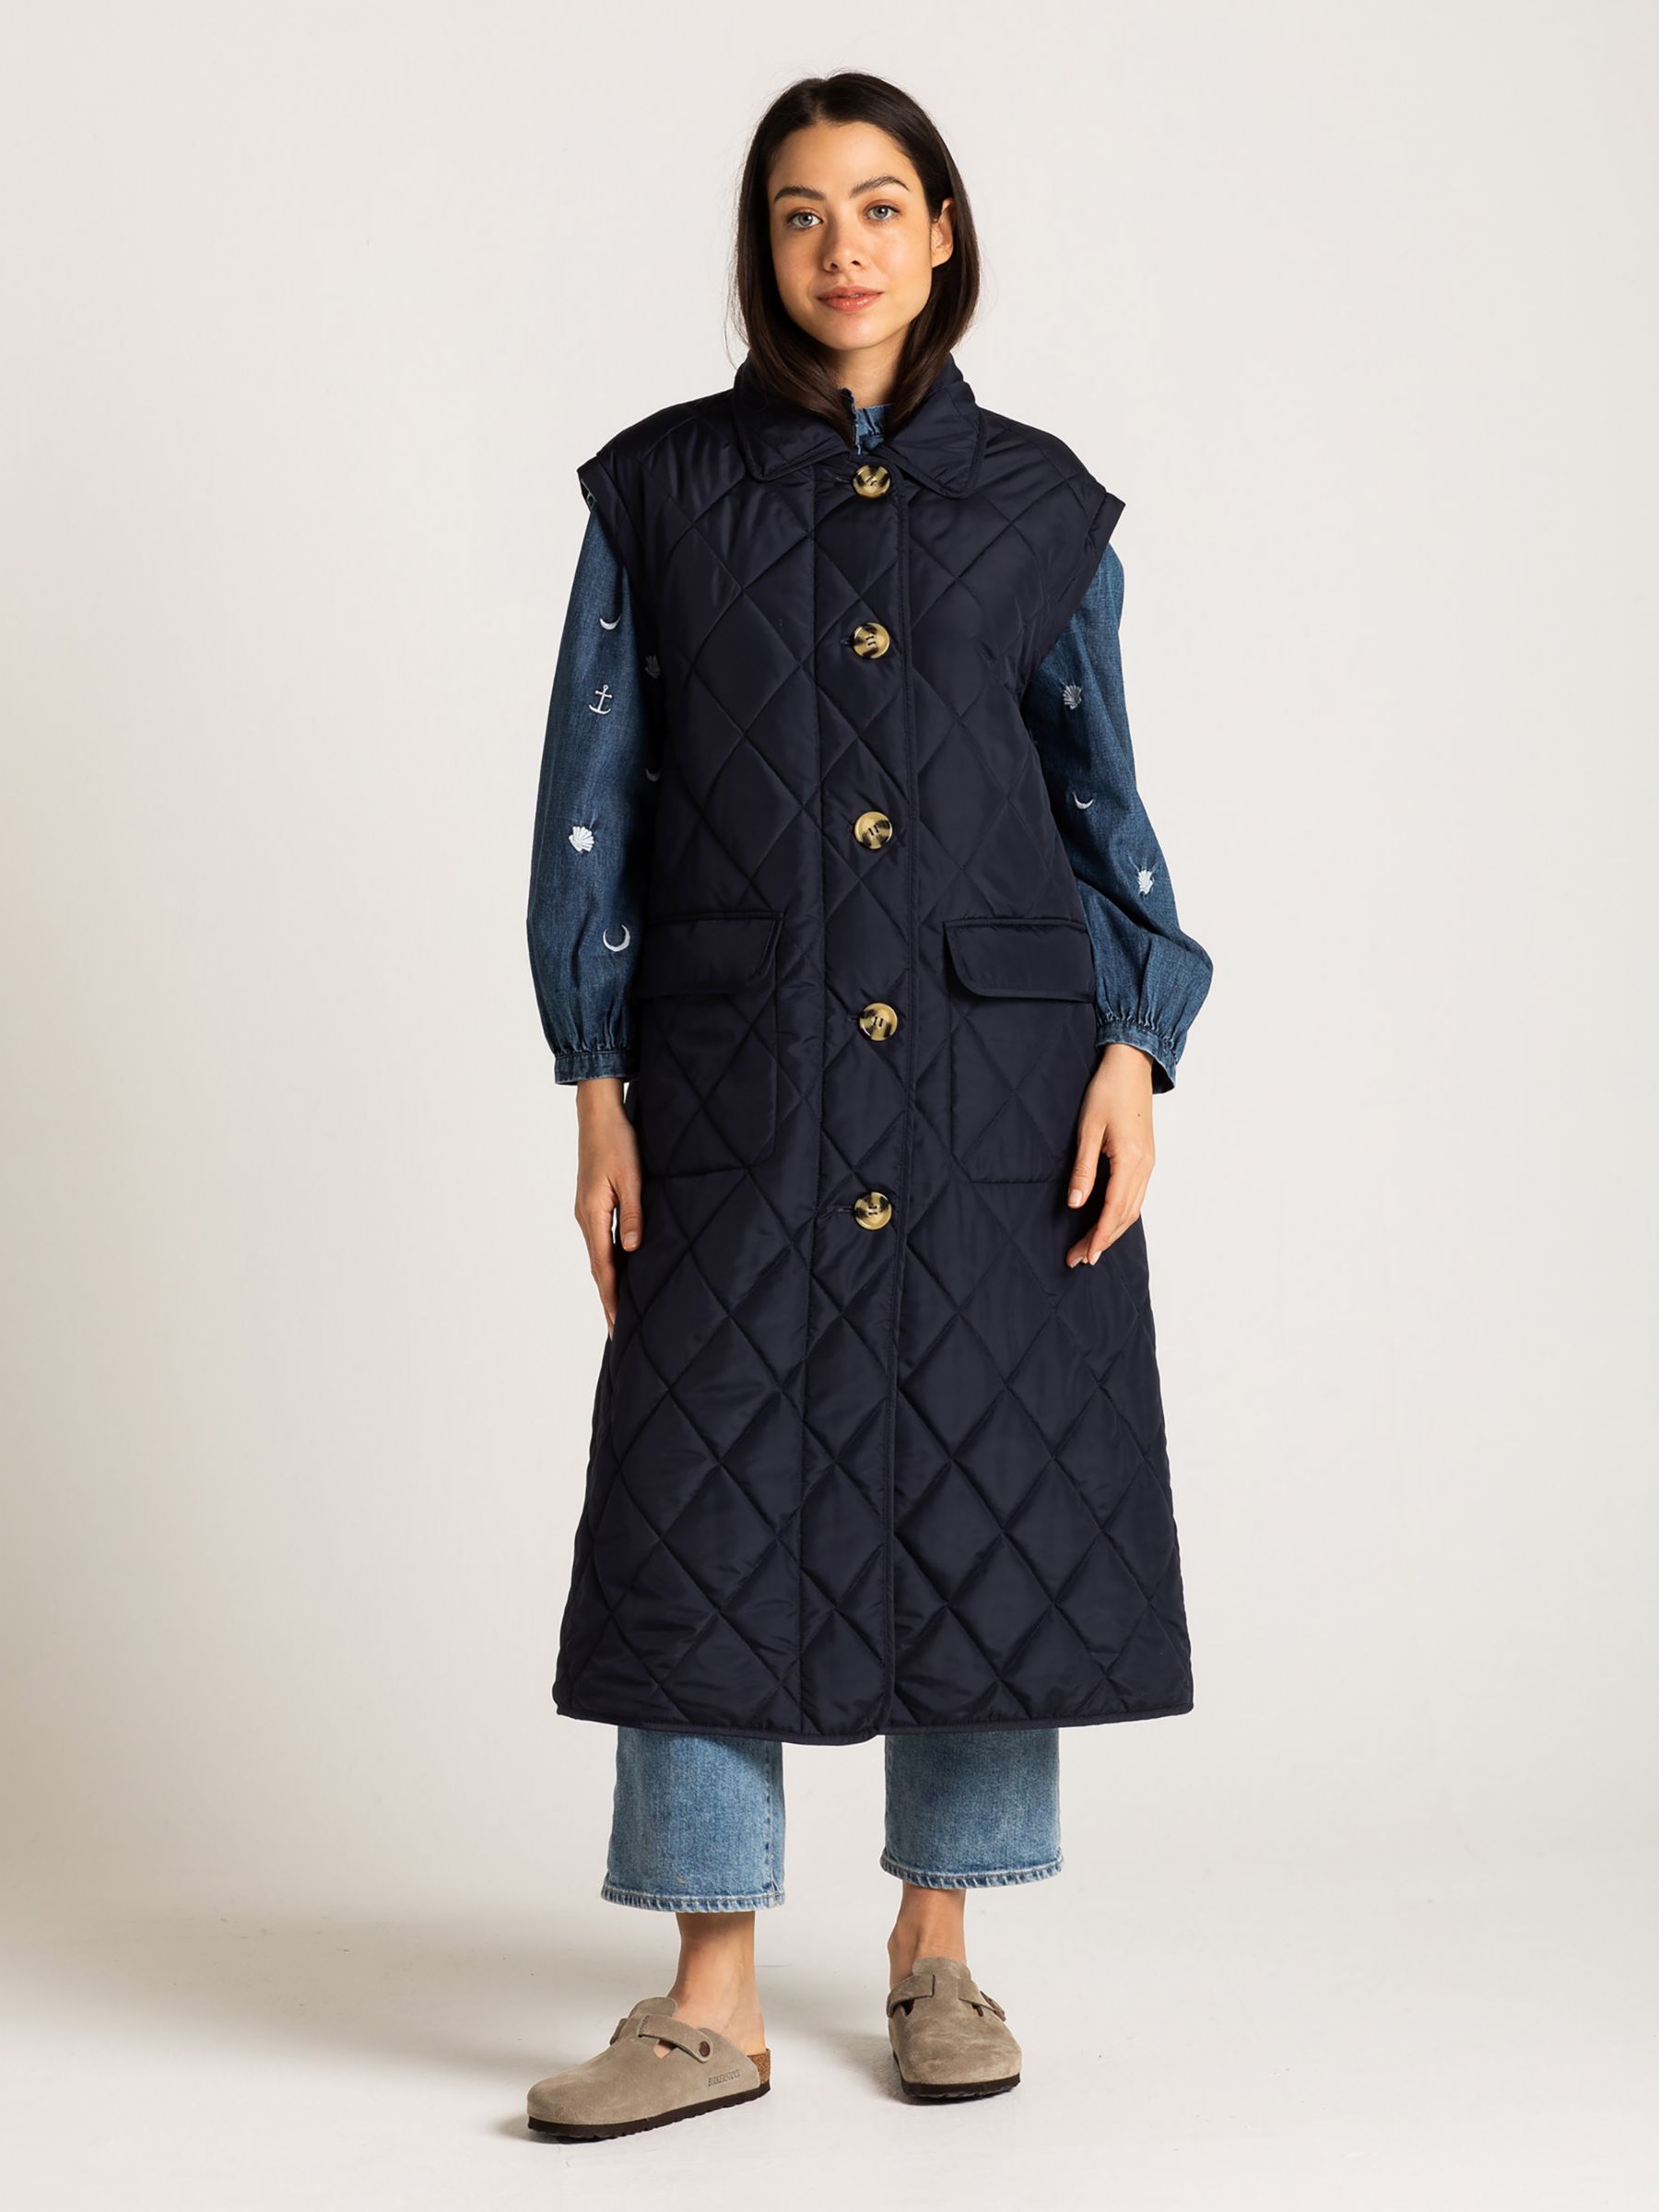 Cape Cove Tide Reversible Quilted Coat, Navy/Sky at John Lewis & Partners